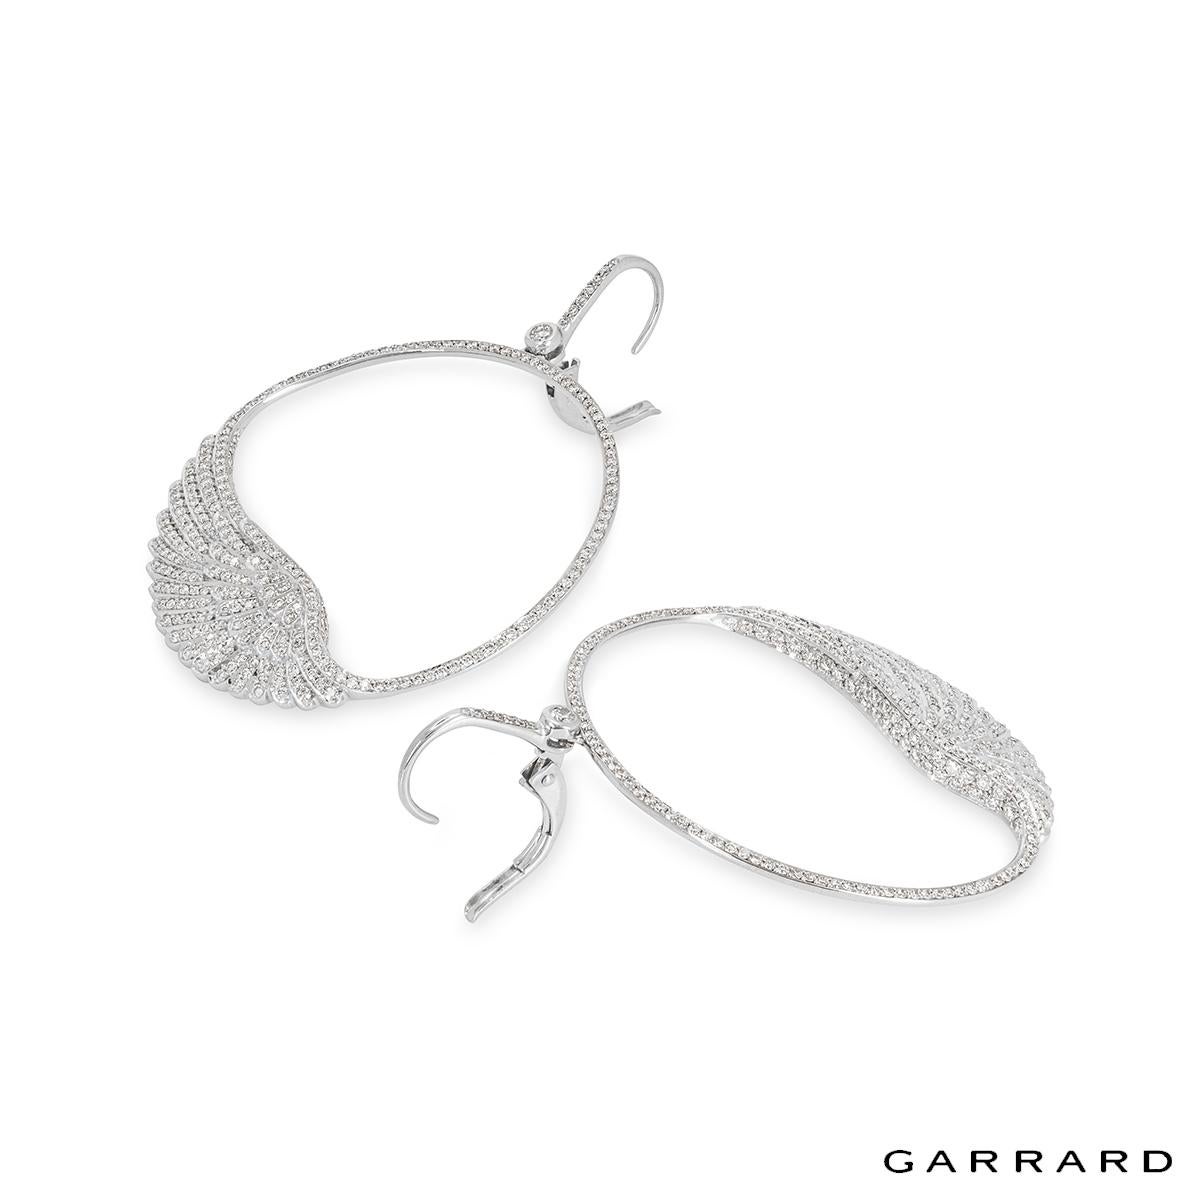 Garrard White Gold Wings Classic Diamond Earrings In Excellent Condition For Sale In London, GB